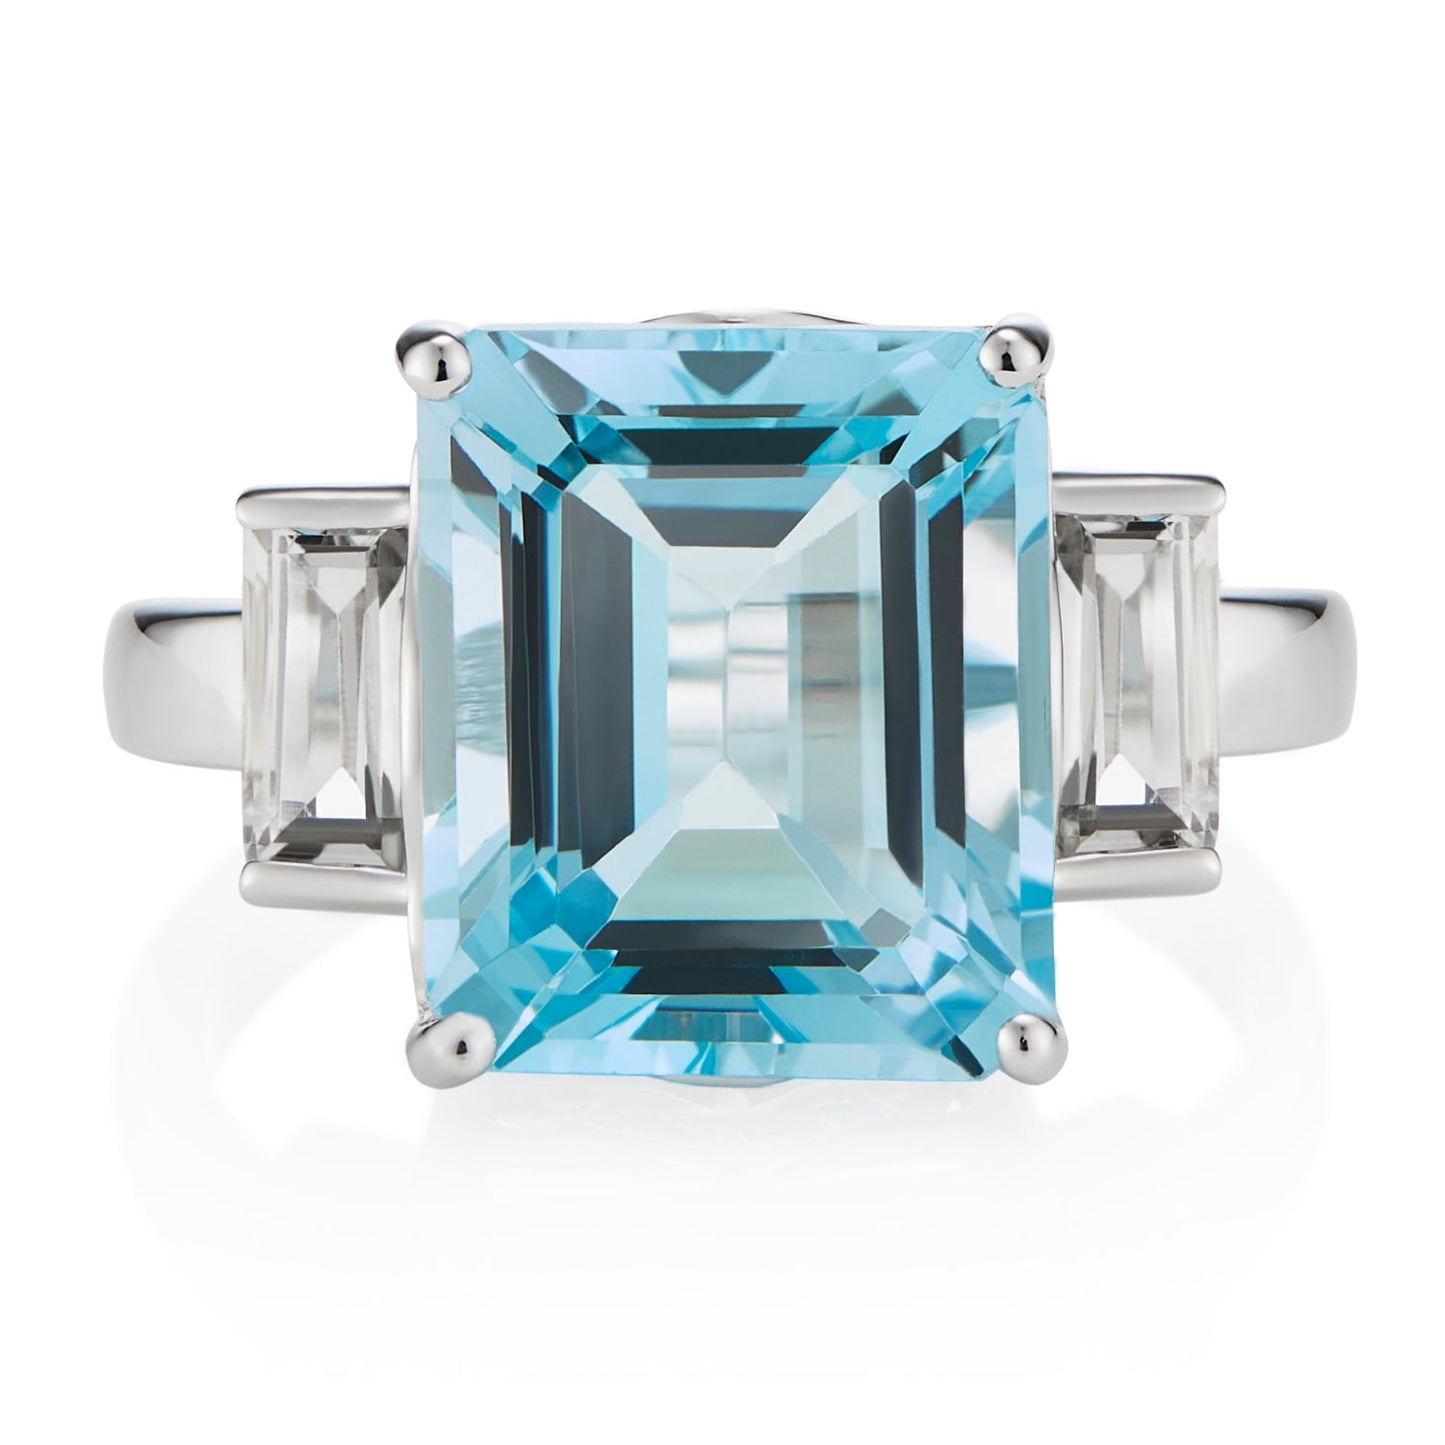 Load image into Gallery viewer, London-made luxury custom gold gemstone jewellery -Octagon White Gold Ring in White Topaz and Blue Topaz – Andalusian Collection, Augustine Jewellery, British Jewellers, Gemstone Jewellery, Luxury Jewellery London.
